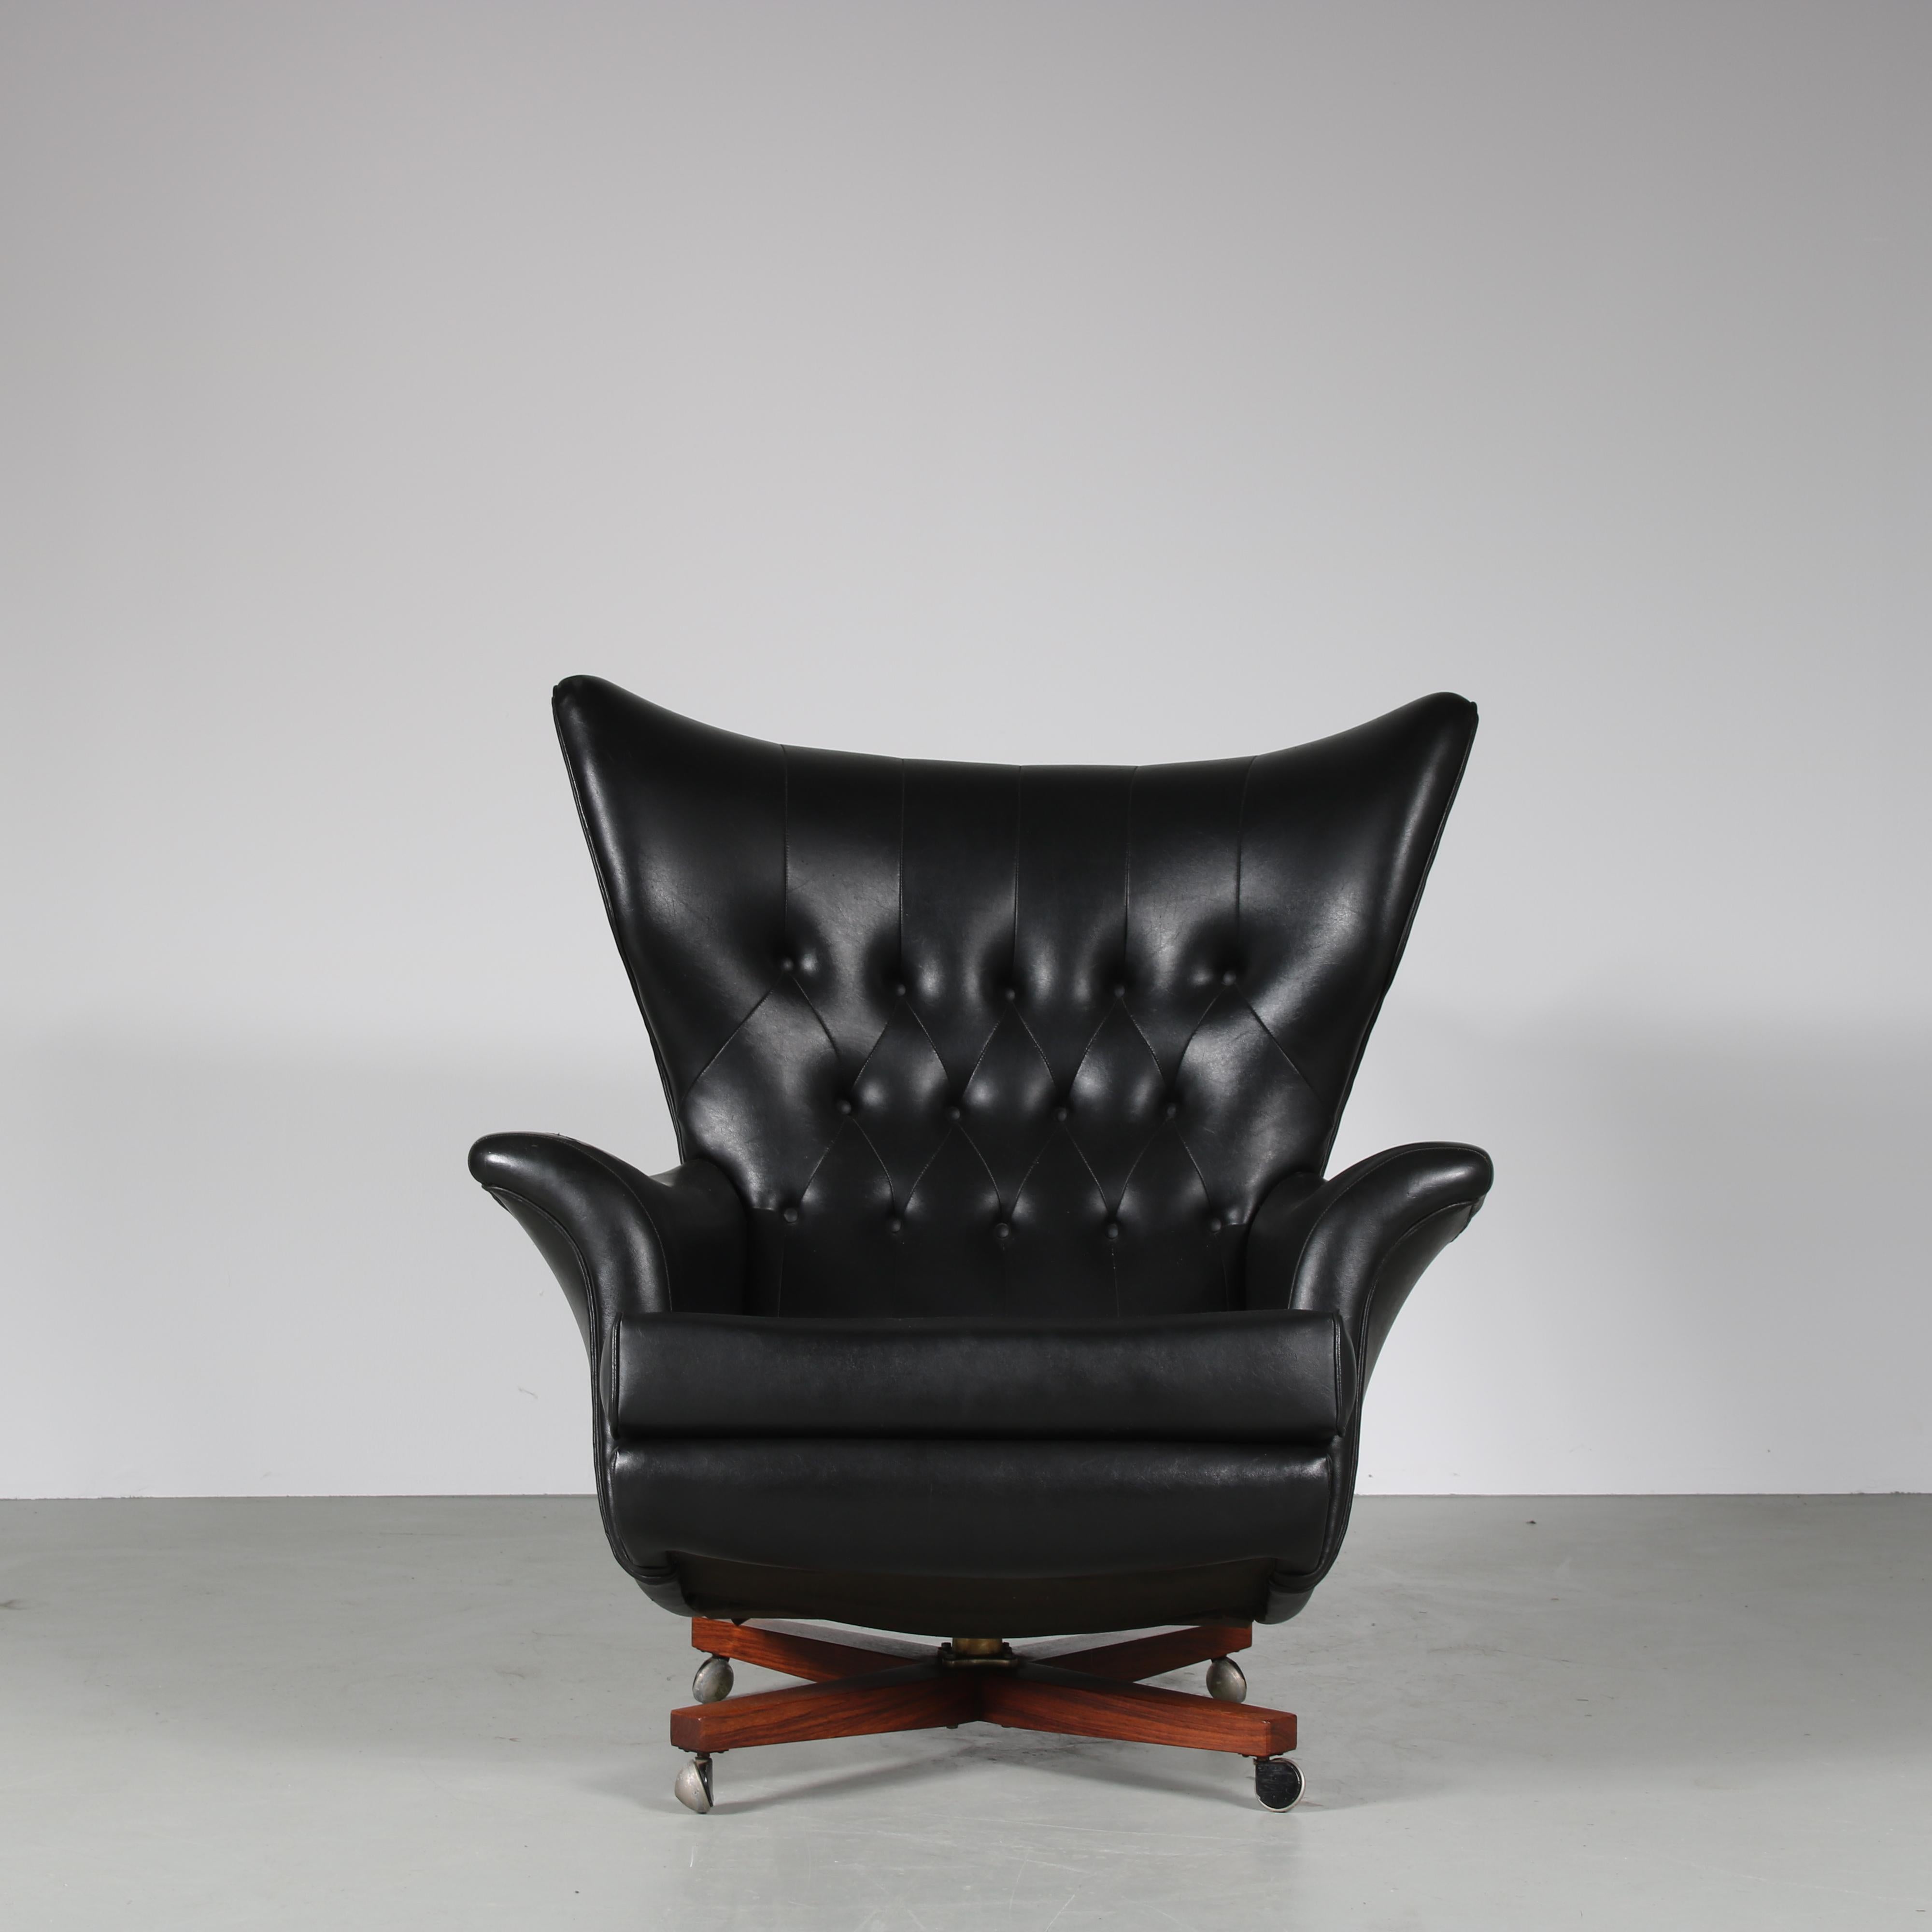 Leather Model 6250 “Villain Chair” by G-Plan, UK, 1960